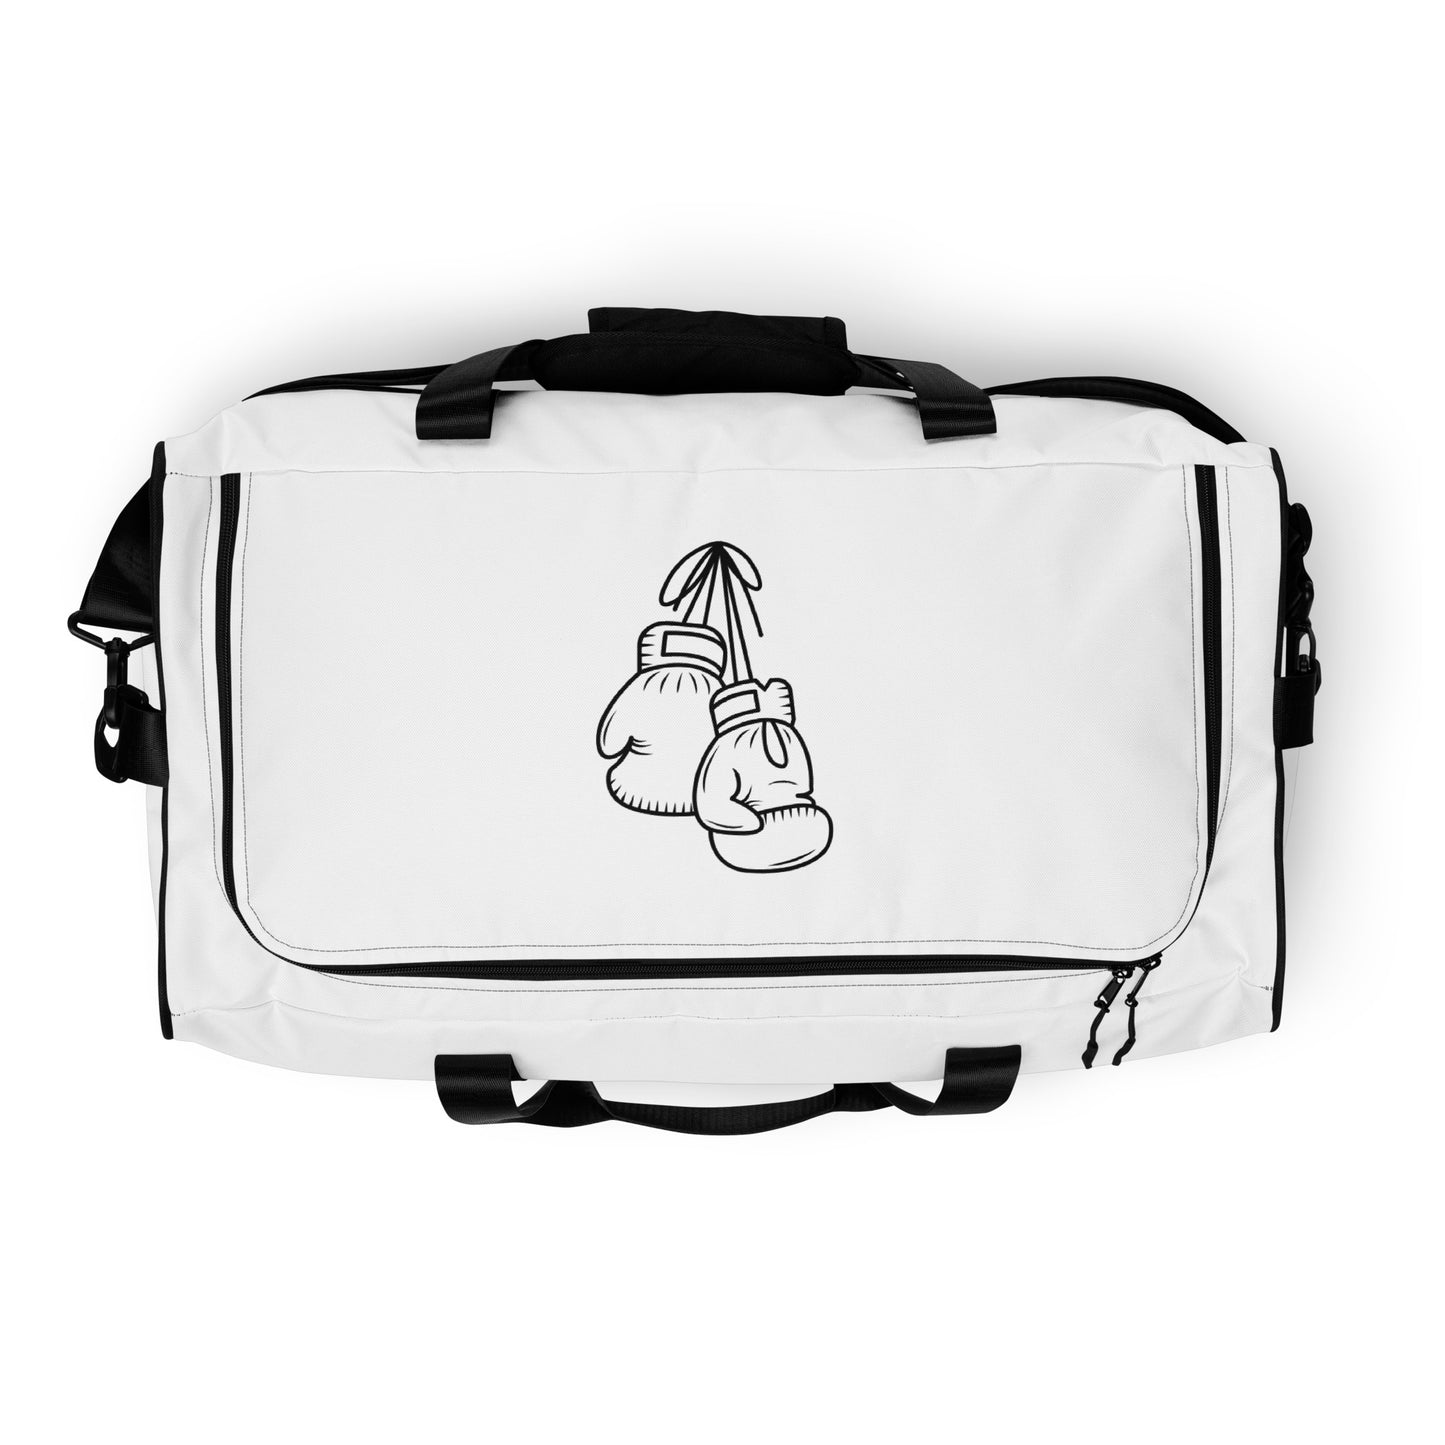 Gym bag with boxing gloves graphic on the top flap